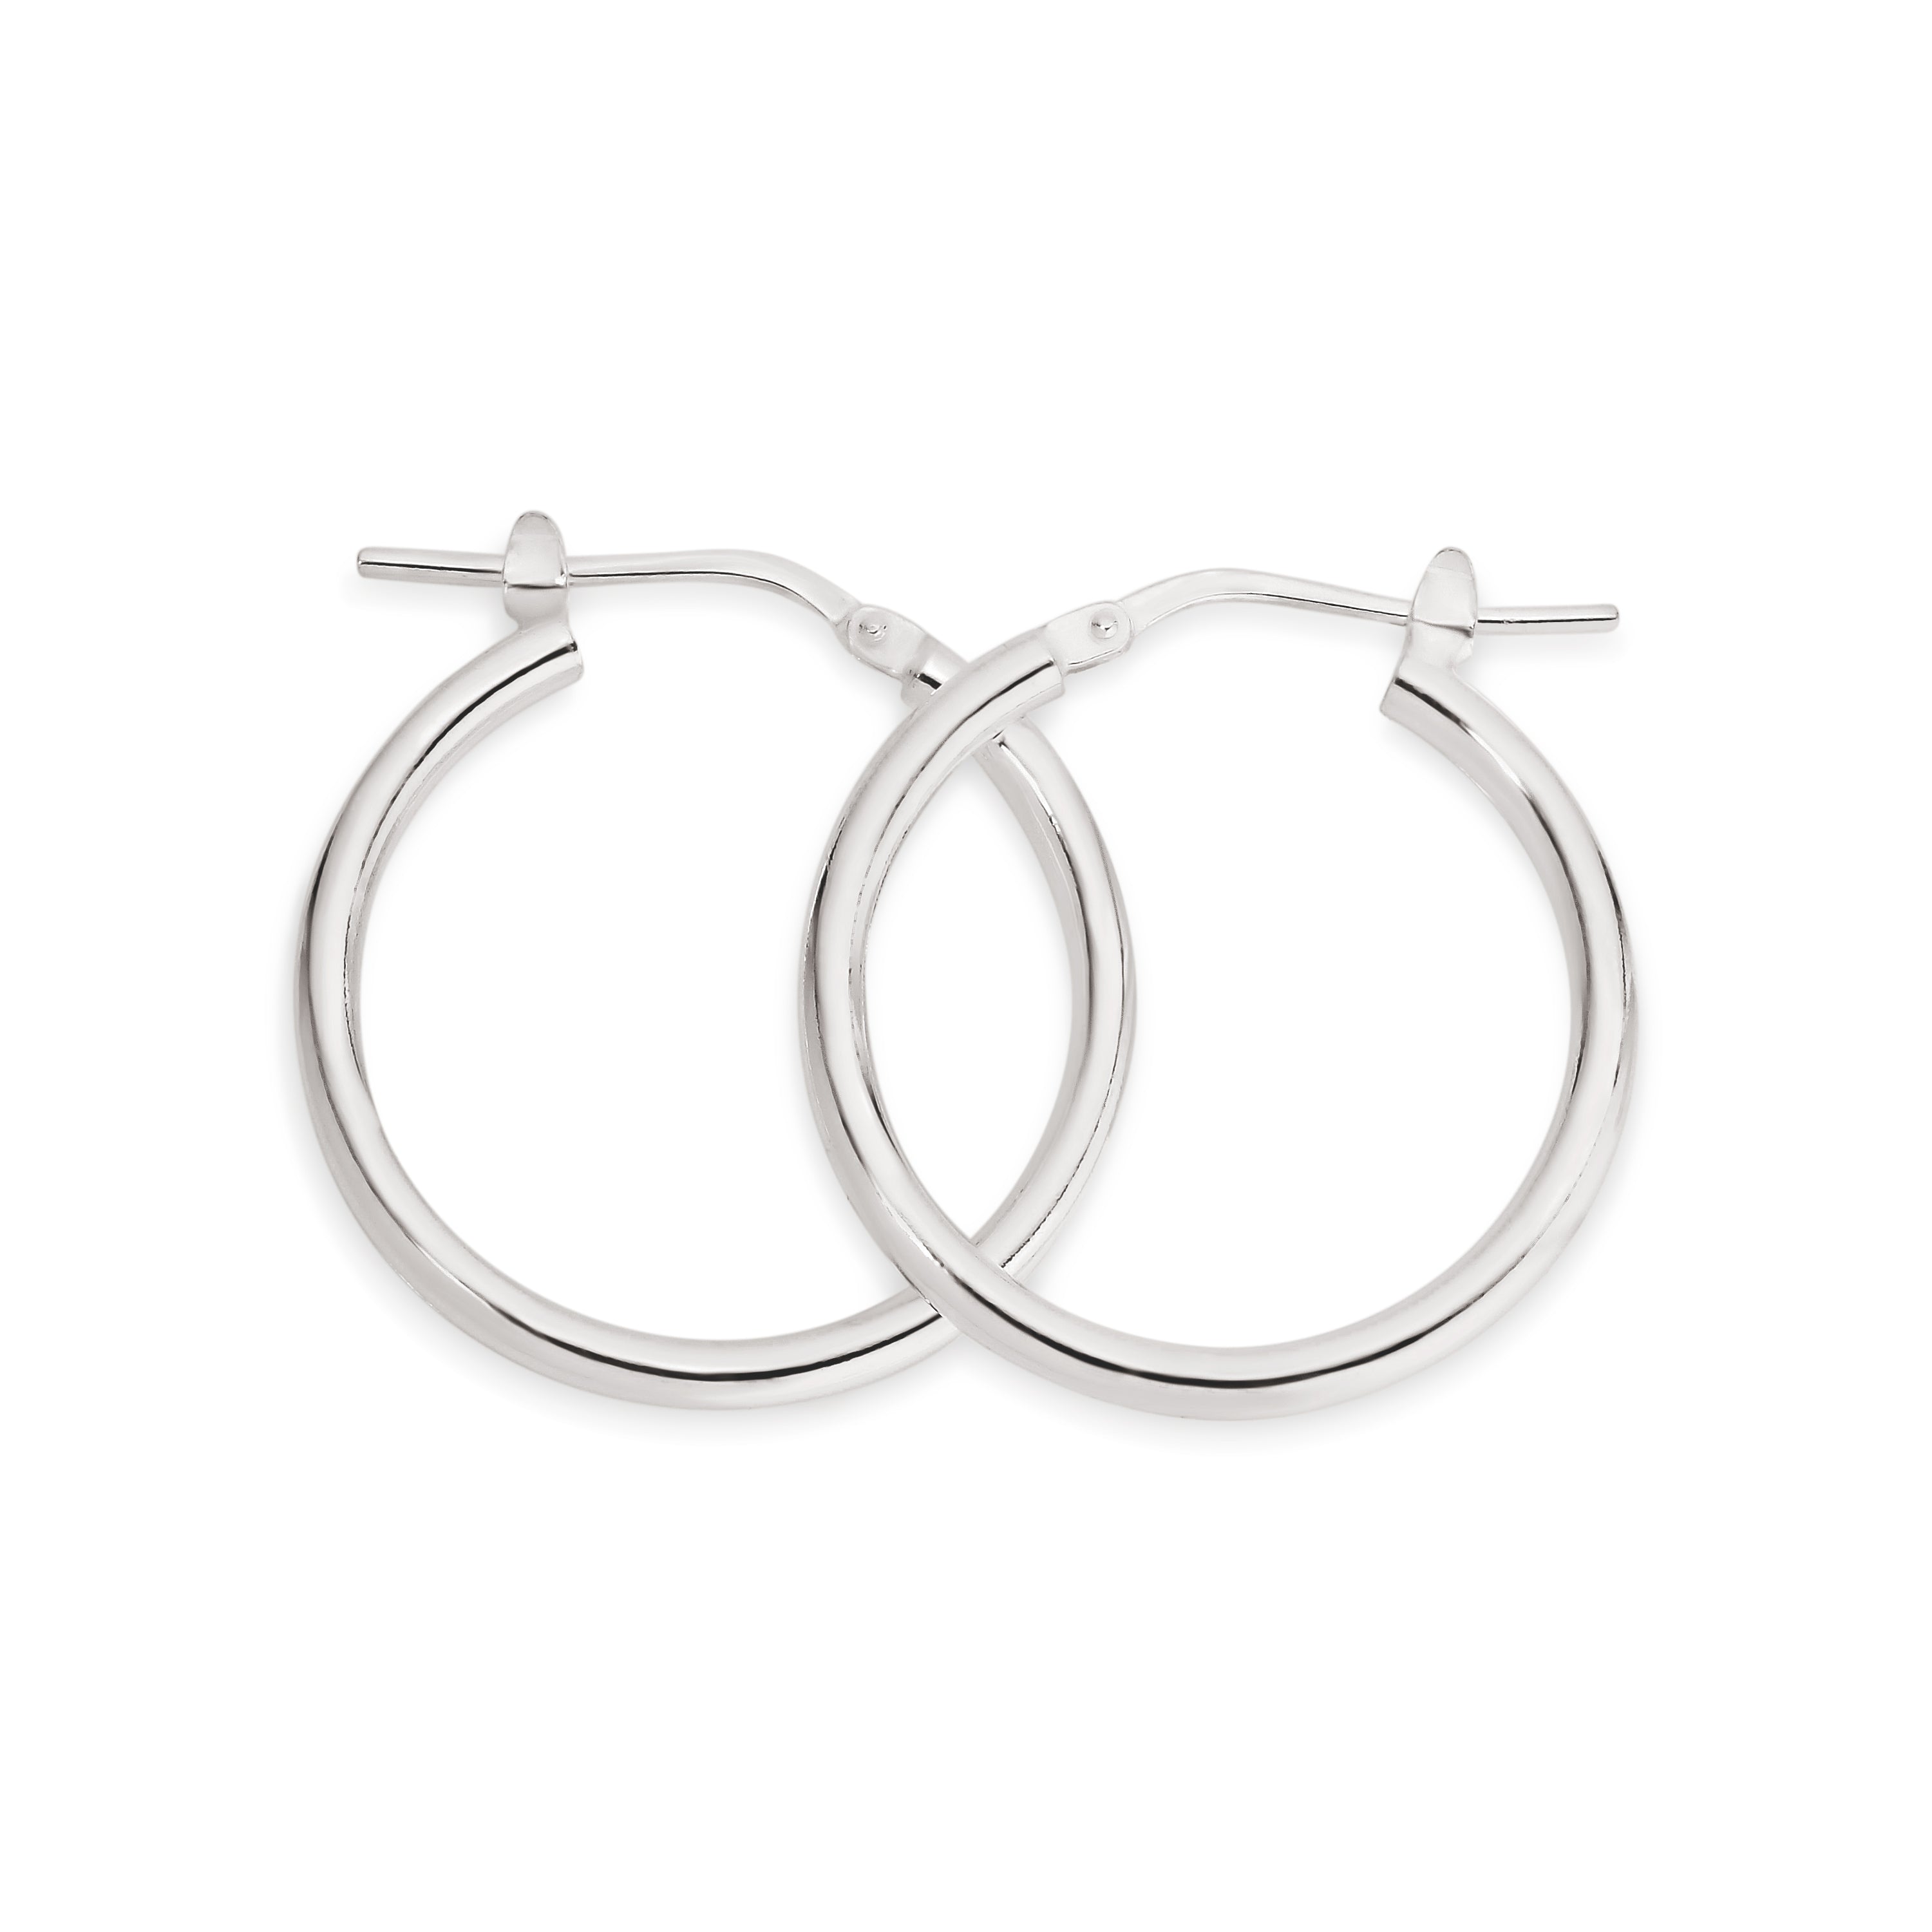 Silver polished hoops 20mm